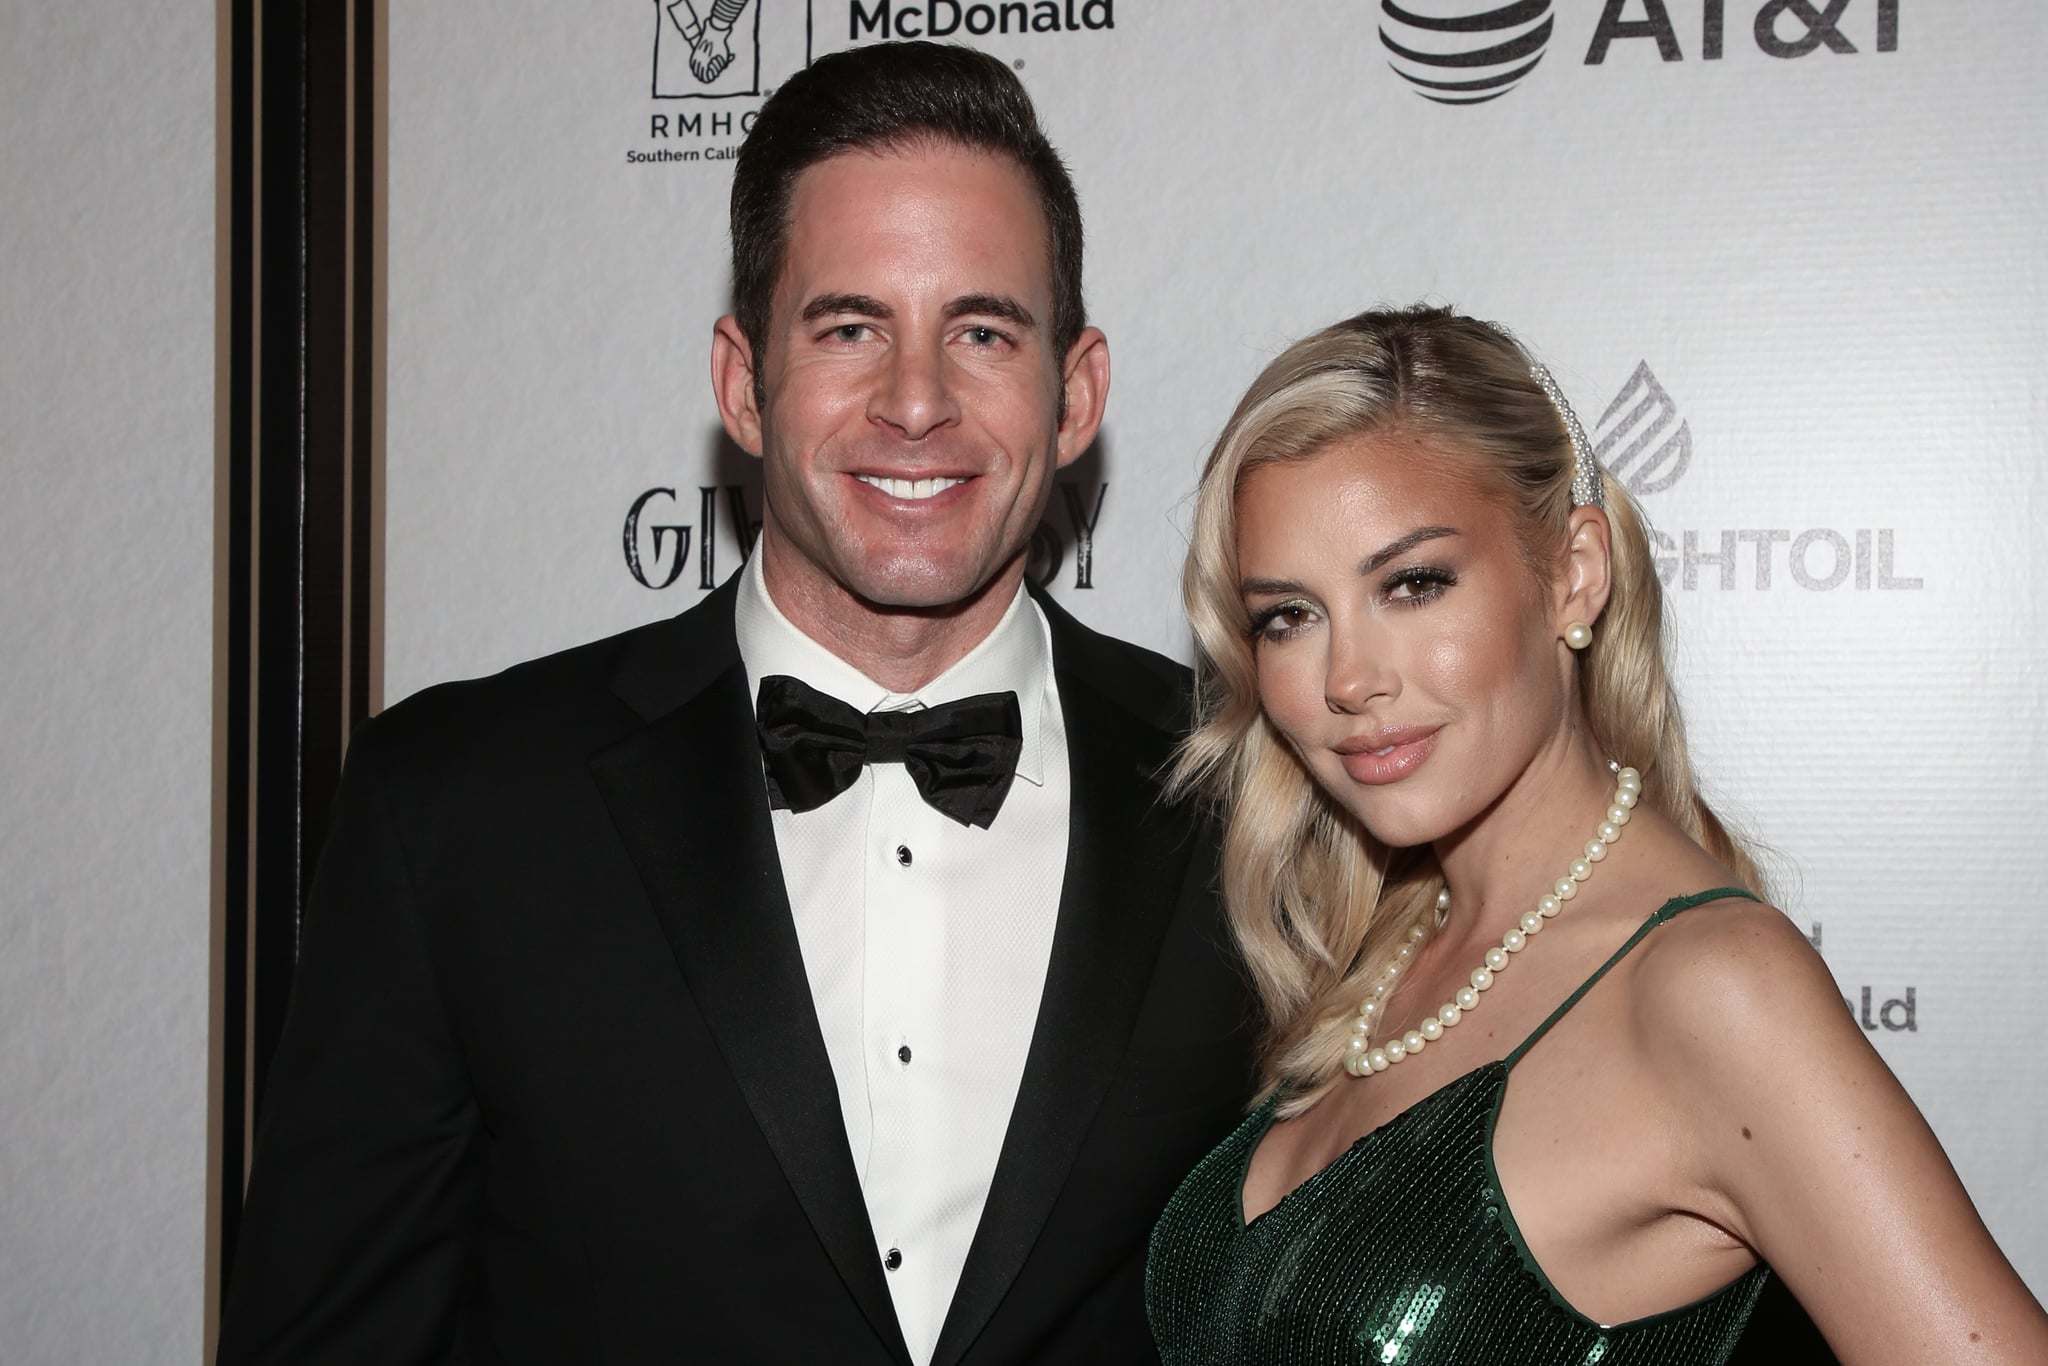 Tarek El Moussa and Heather Rae Young Are Engaged – We Can’t Wait to See Their Wedding Photos!